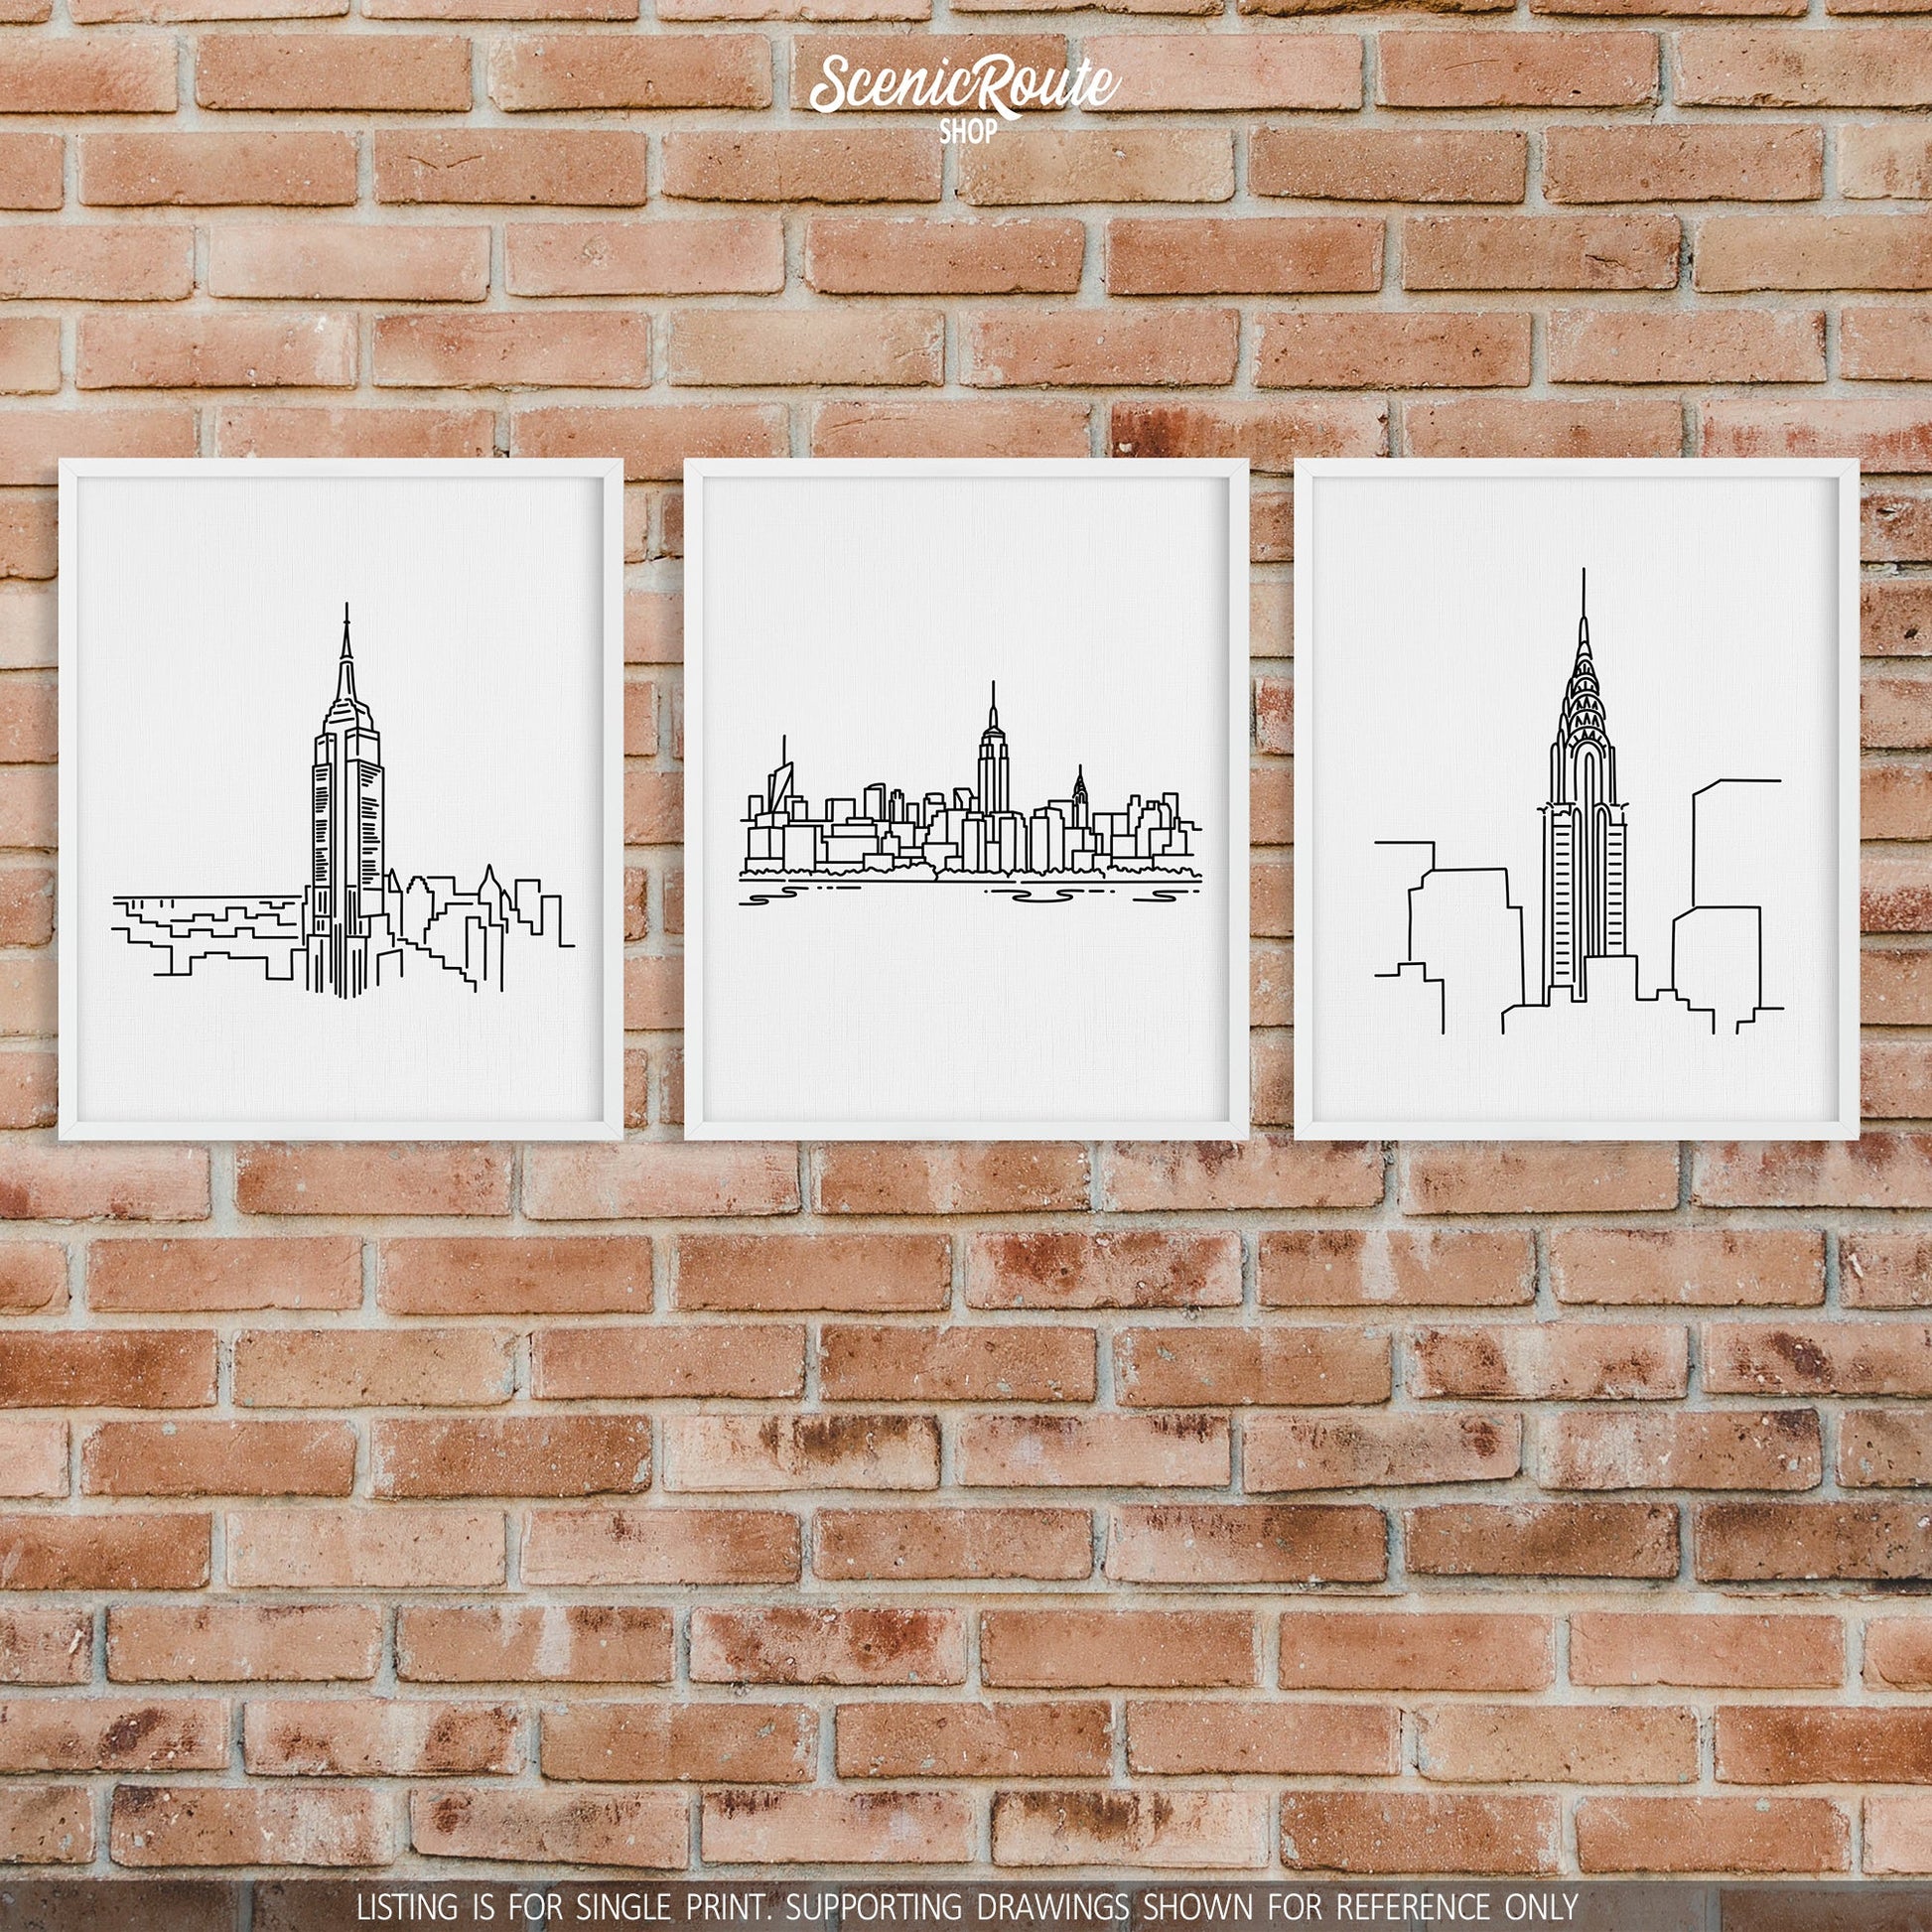 A group of three framed drawings on a brick wall. The line art drawings include the Empire State Building, New York City Skyline, and Chrysler Building